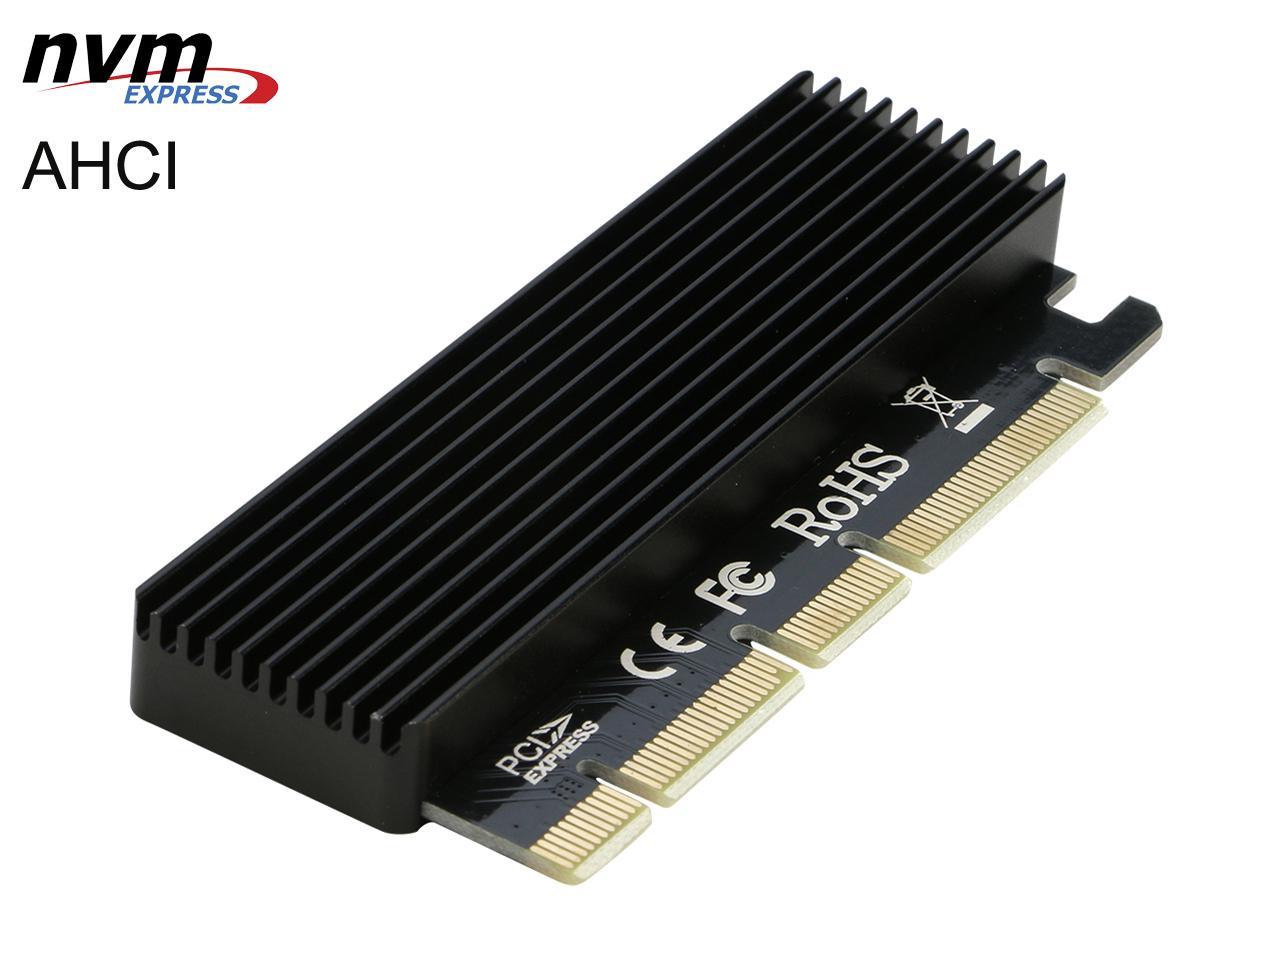 Concreet Premisse Suradam PCIe M.2 NGFF NVMe AHCI SSD to PCIE 4x 8x 16x Adapter Card for M Key 2230  2242 2260 2280 mm Size PCIe M.2 SSD Full Speed like Samsung XP941,  SM951(NVMe), 950,